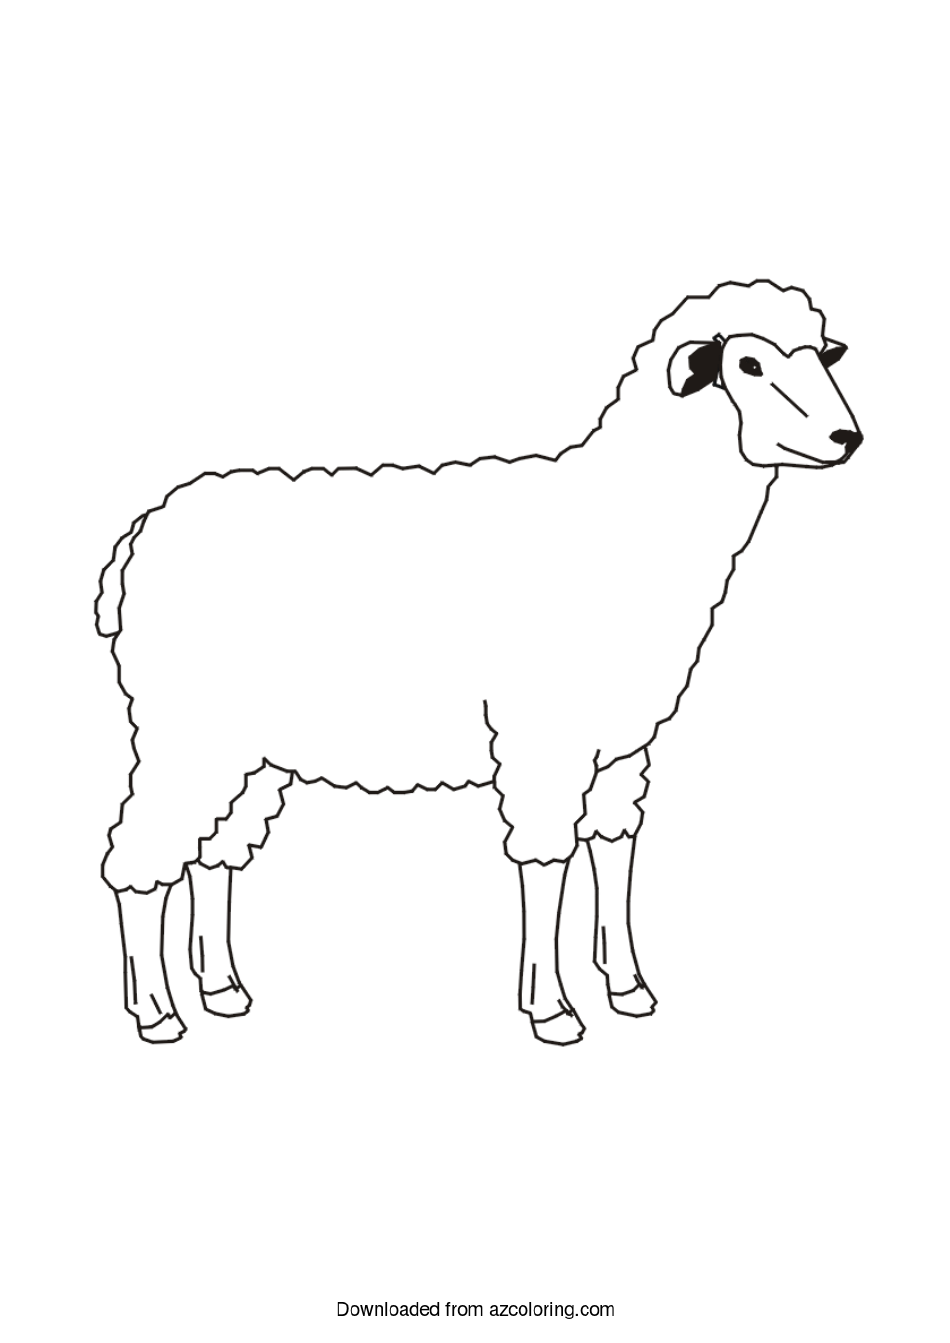 Cute Sheep Coloring Page - Printable Coloring Sheet for Kids